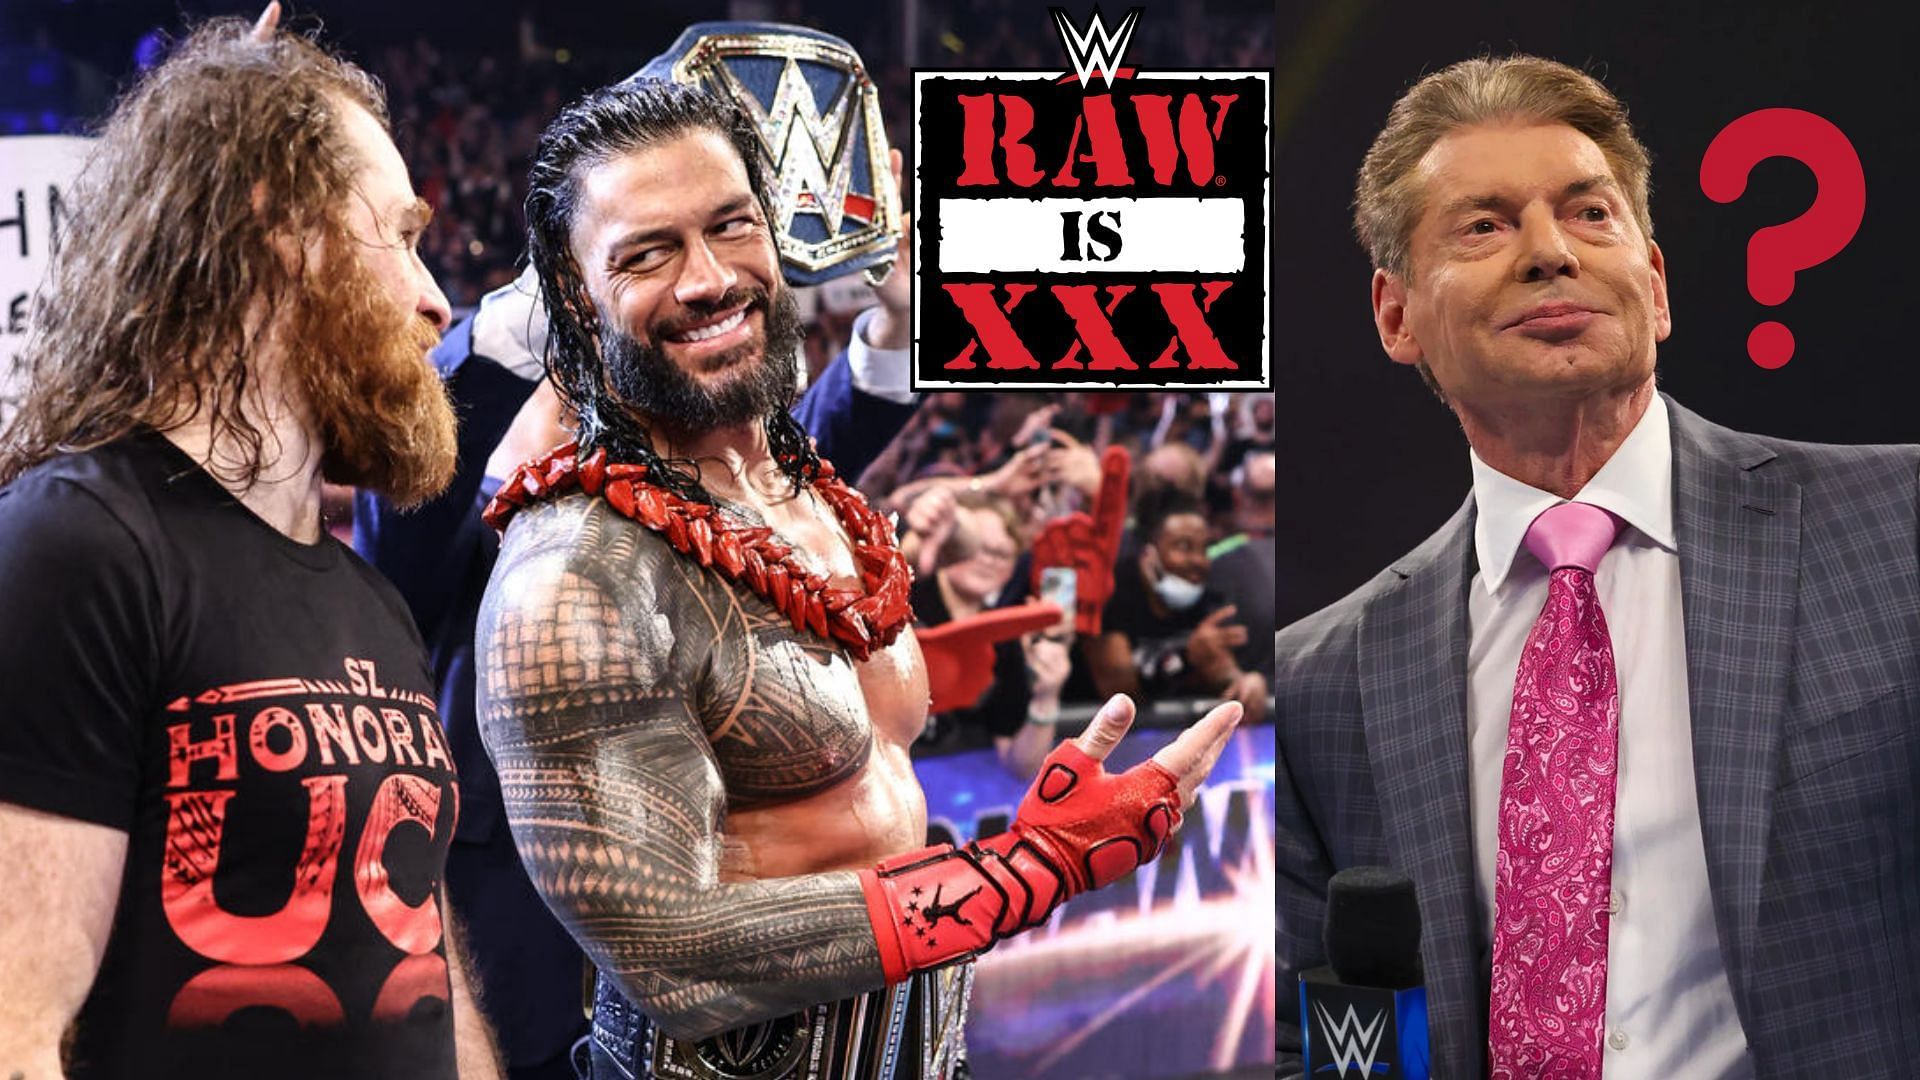 Roman Reigns has ordered the Trial of Sami Zayn for RAW XXX.